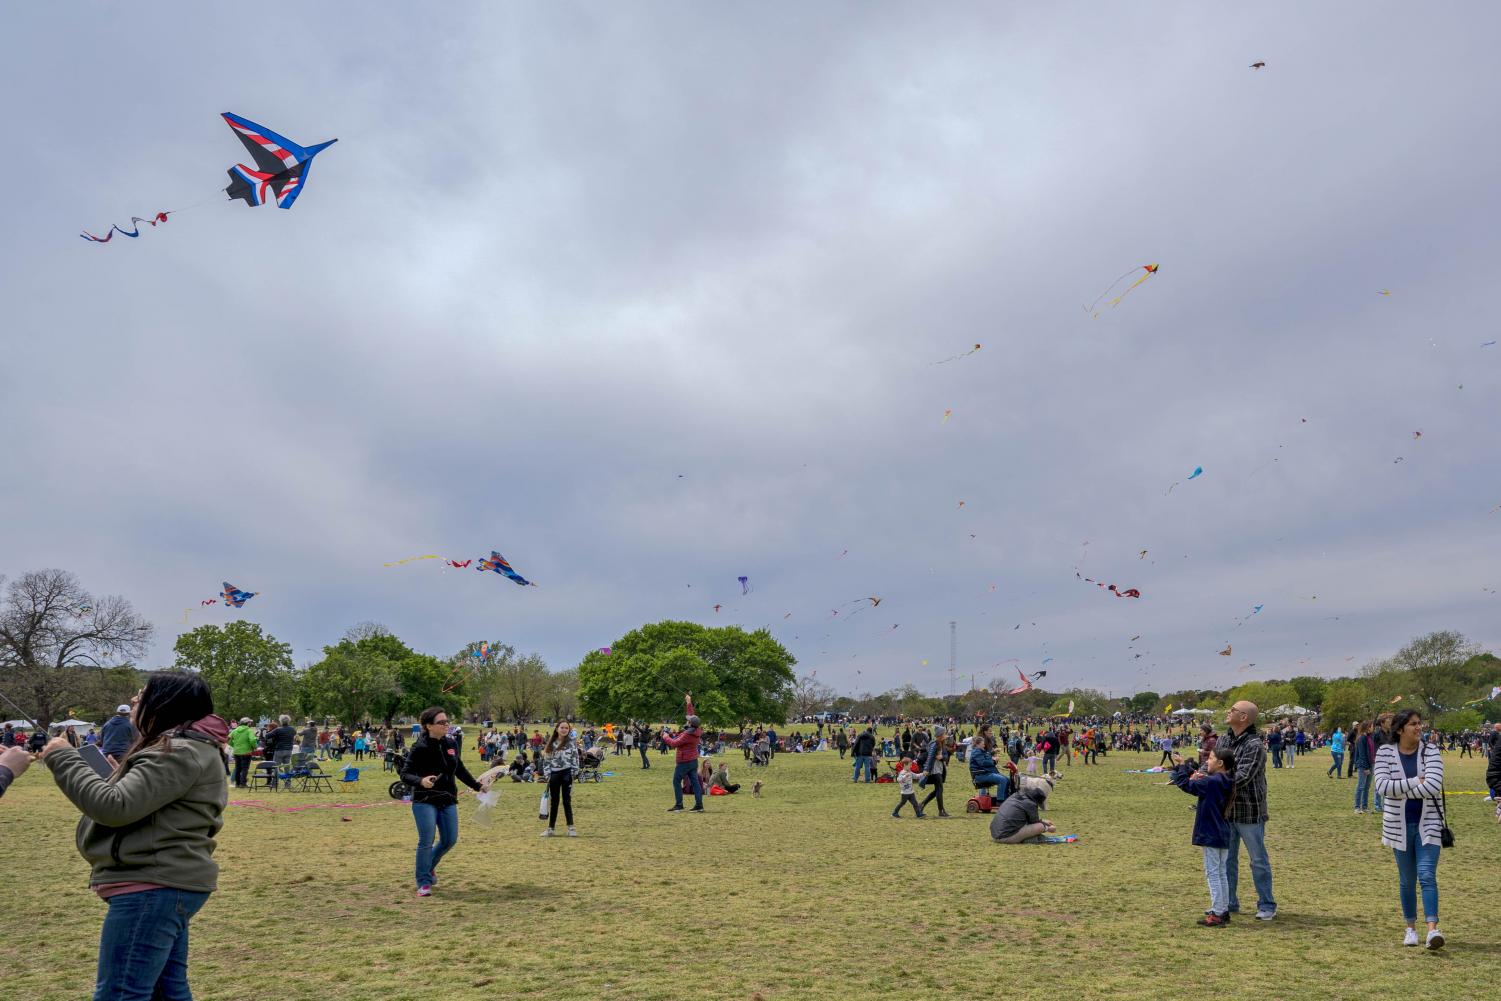 Annual kite festival fills Zilker Park with color, brings community